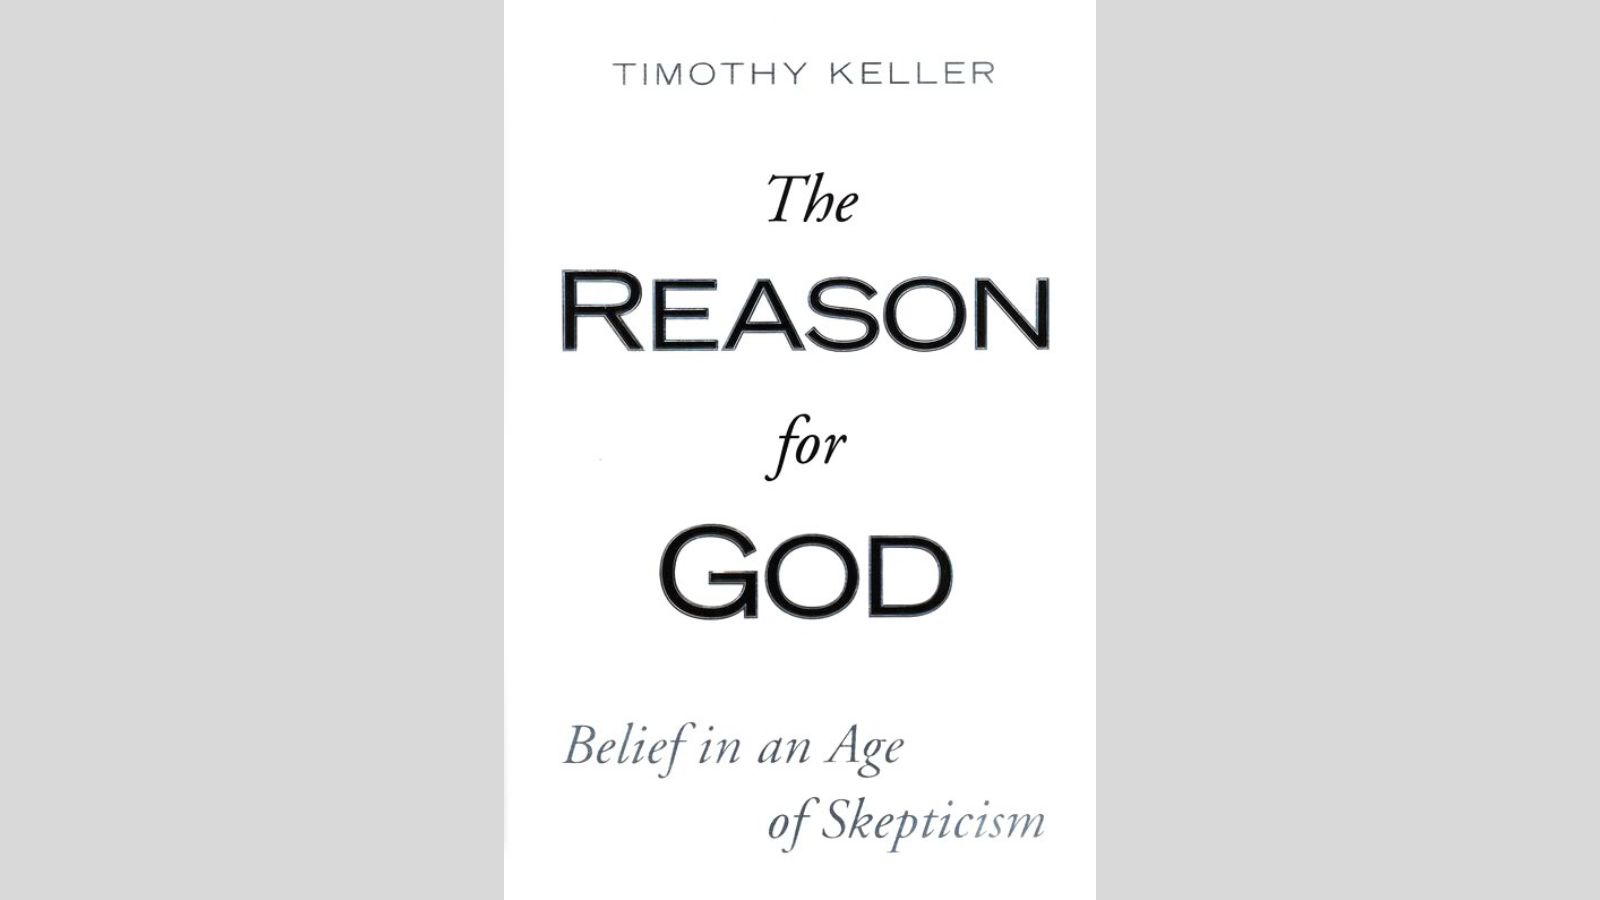 <p>Timothy Keller’s acclaimed book and accompanying DVD cater to believers and non-believers, focusing on the latter. Keller challenges the perception that Christianity repels individuals due to its perceived rigidity, asserting that this need not be the case. Central to his argument is the assertion that Christianity can coexist harmoniously with other faith traditions and withstand scrutiny regarding suffering and injustice without undermining the existence of God. This thought-provoking work prompts readers to reconsider preconceived notions and critically reflect on faith and doubt.</p>